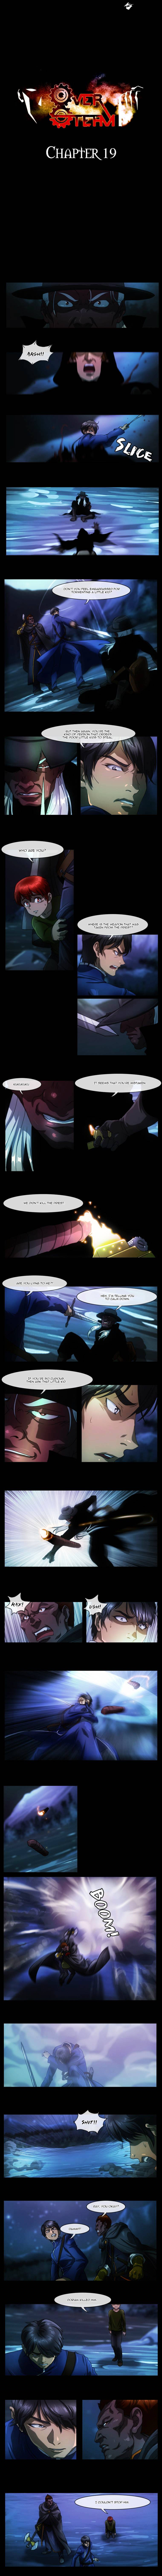 Over Steam - Page 2